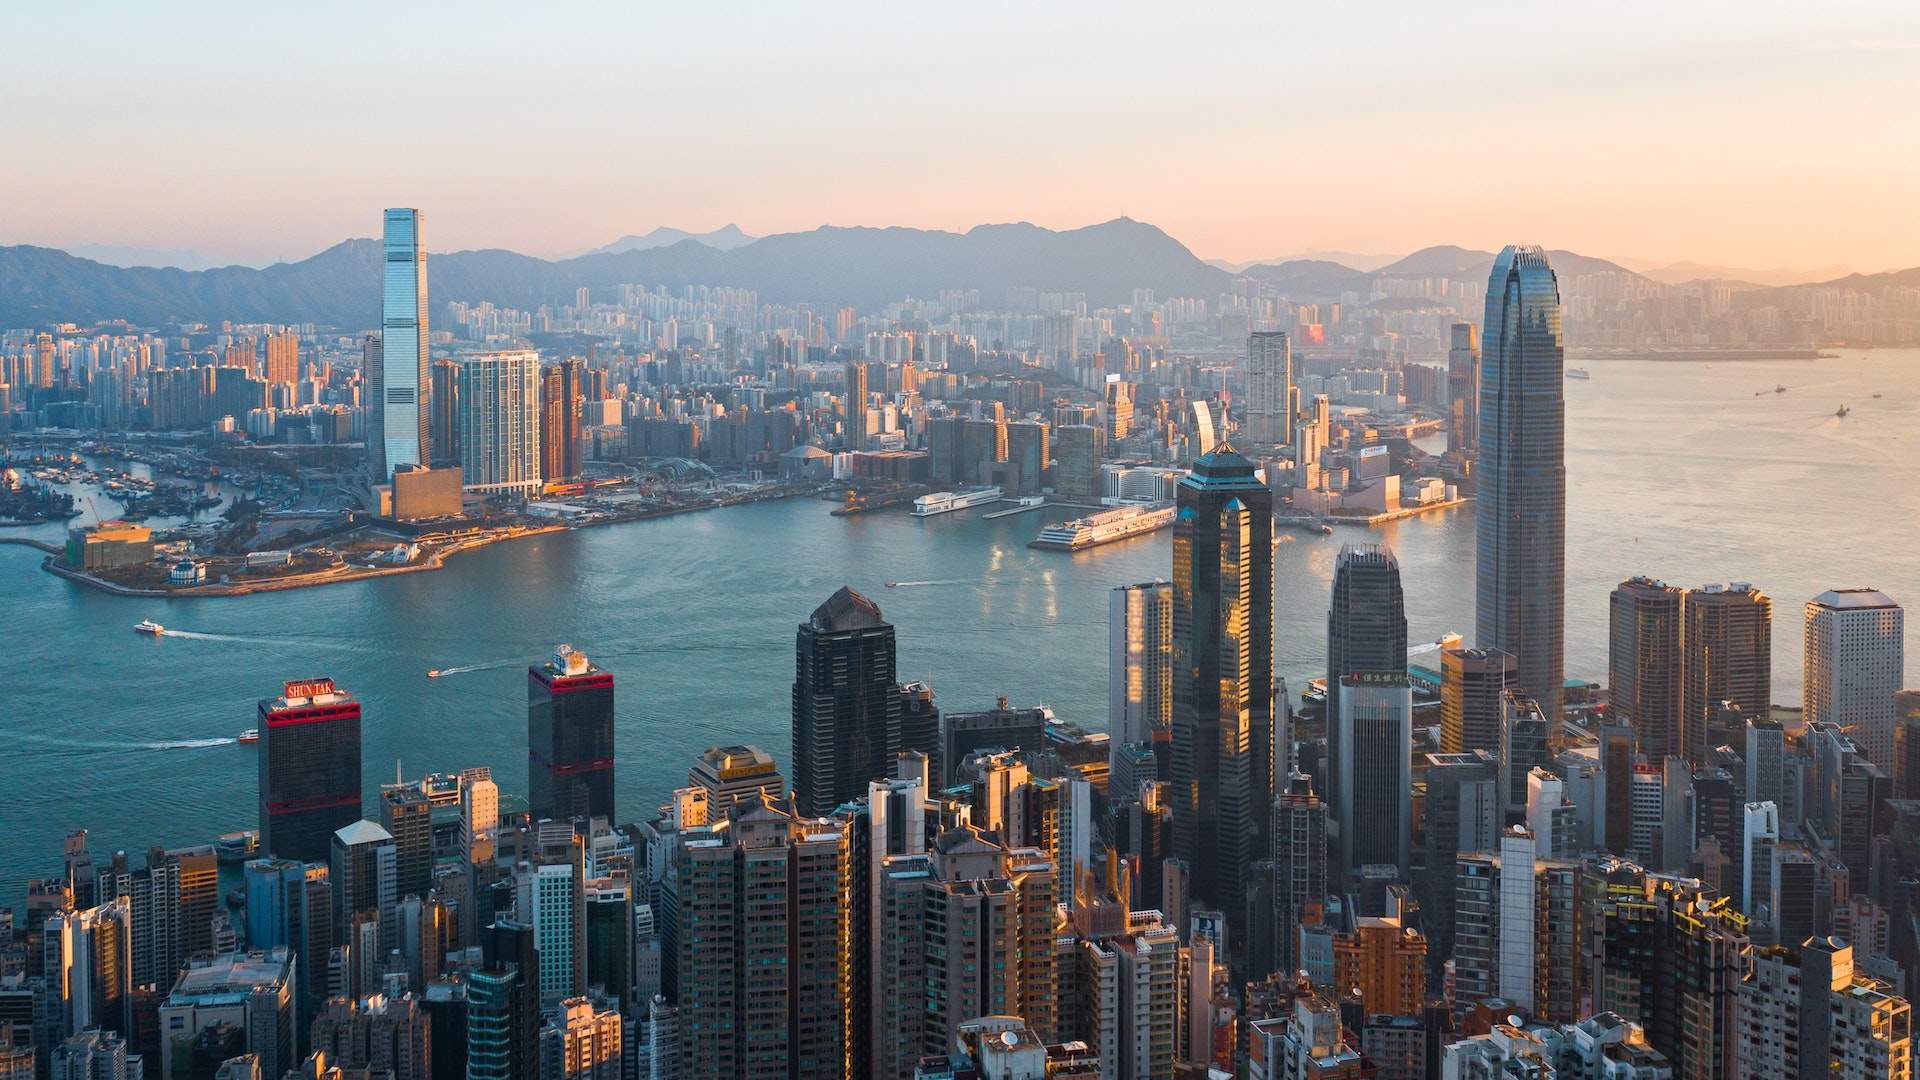 A CP Writer — and Seasoned Hong Kong Local — on What He Can't Wait to Experience on His Next Visit